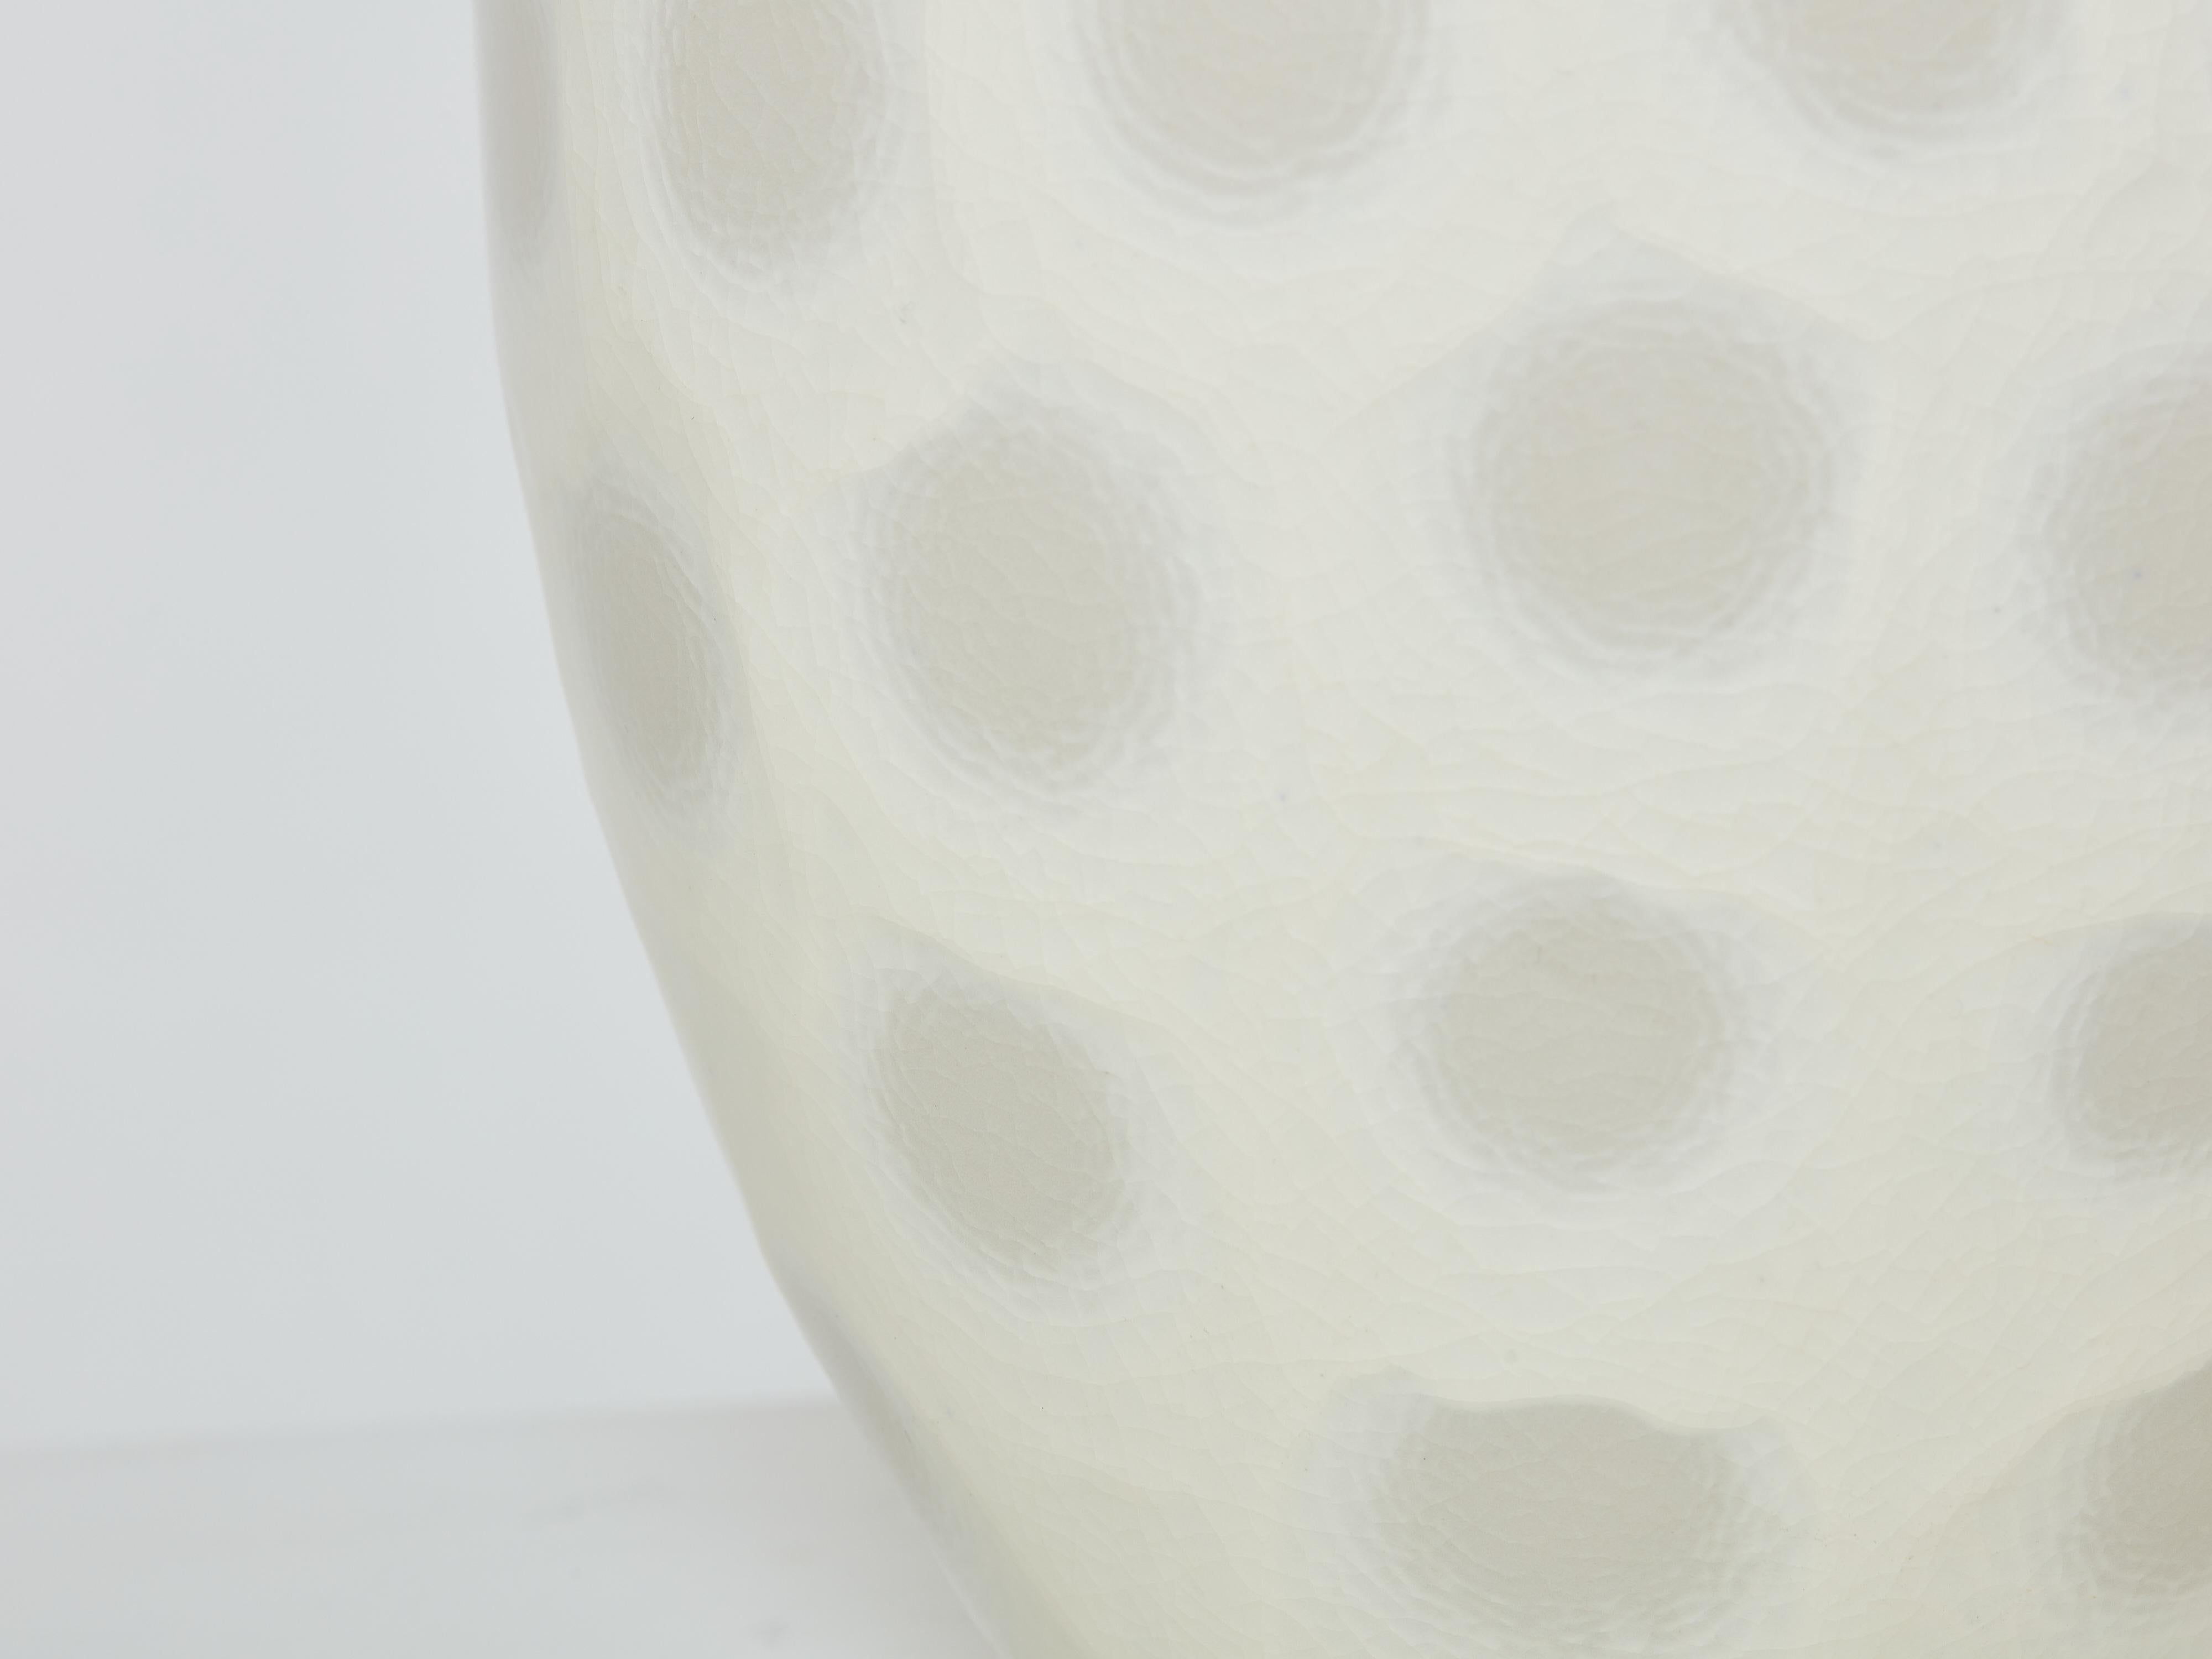 Beautiful large off white crackle glass shells ceramic vase produced by Habitat in the 1980s. This vase has a very decorative presence, and is found in a perfect condition.
